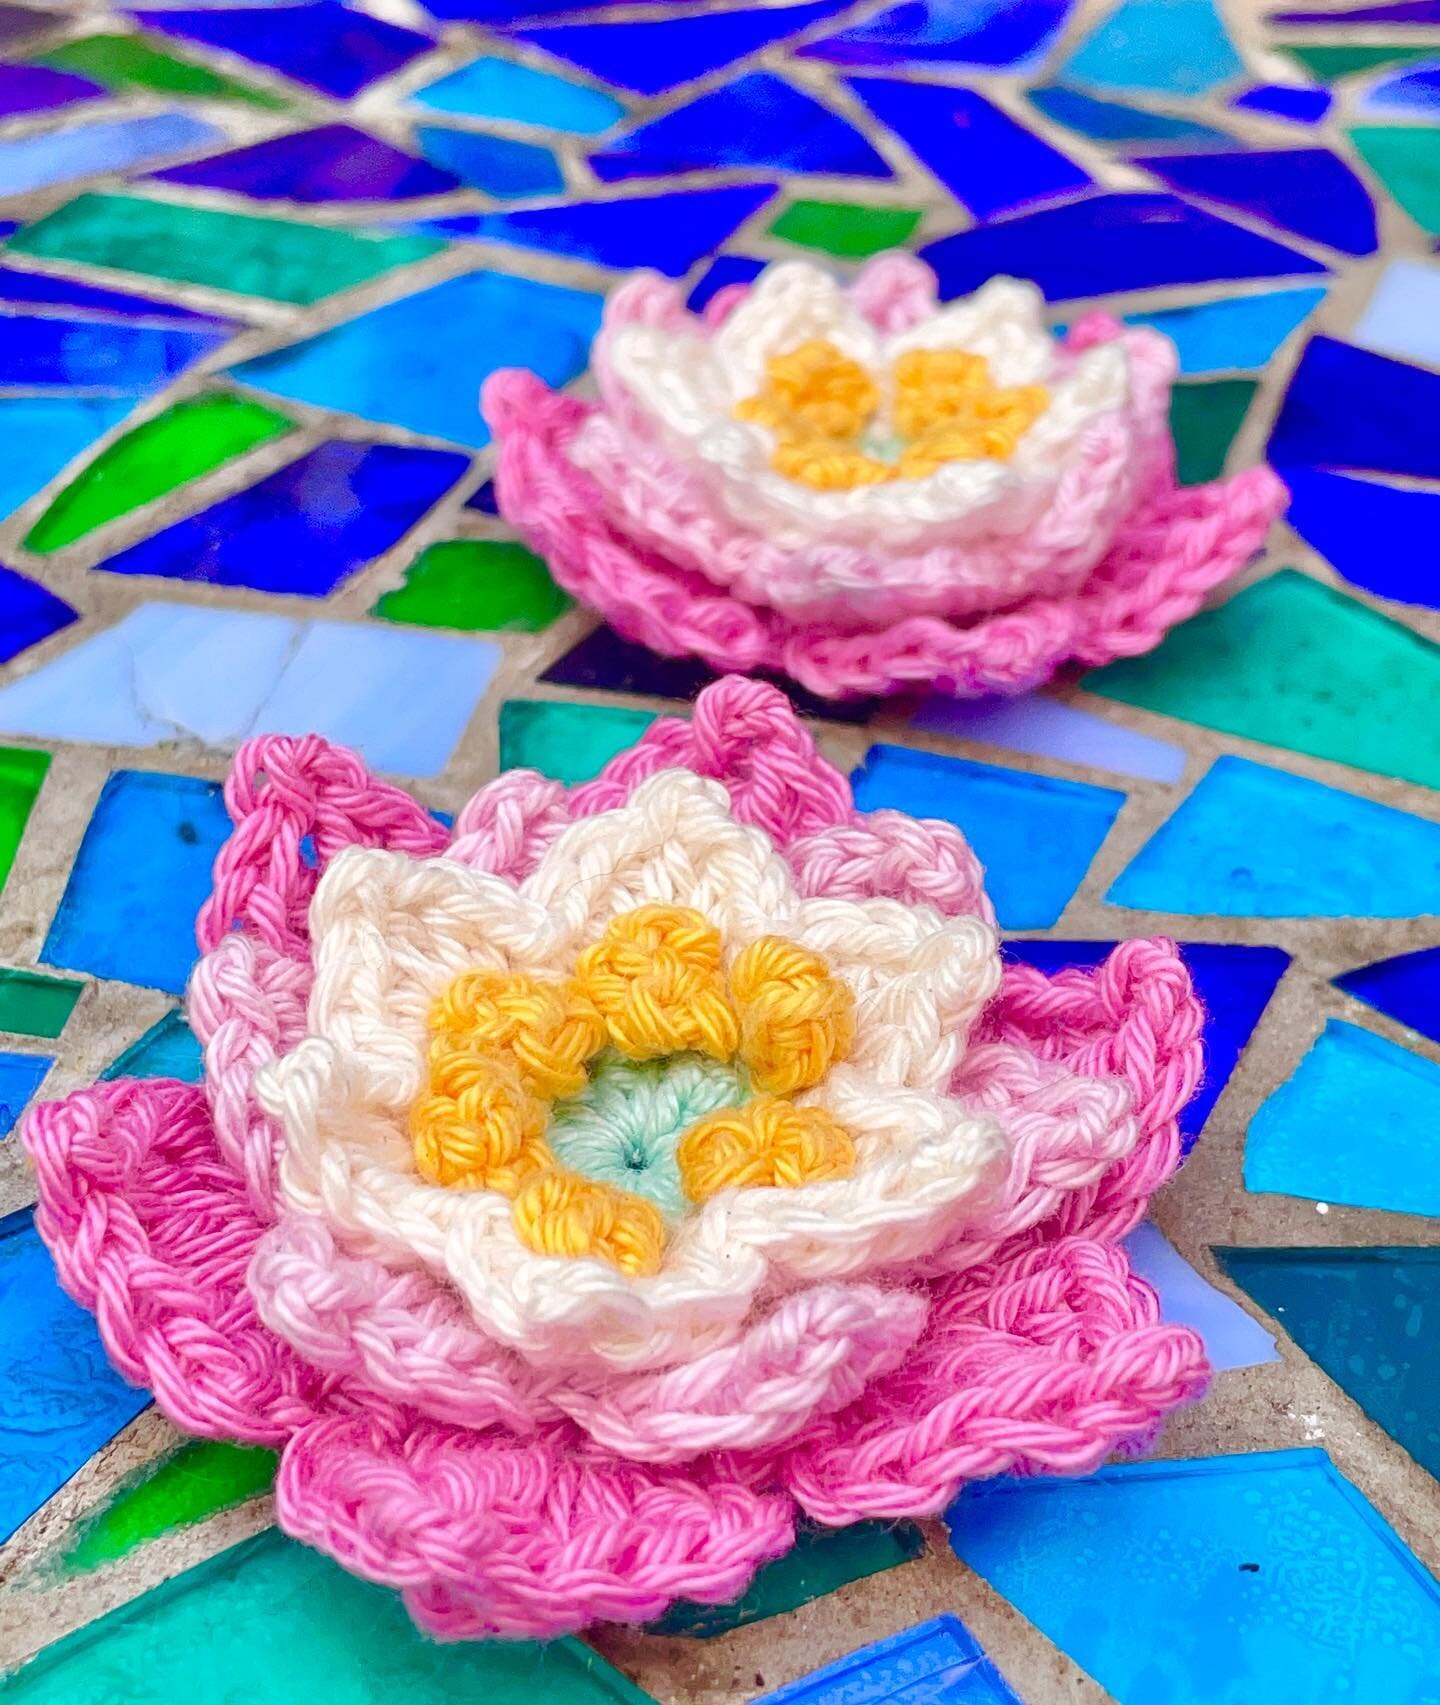 Going for the waterlily vibe &hellip; can you tell! 
🪷☀️🪷☀️🪷☀️🪷☀️🪷☀️
.
#crochetflowers #crochetflower #colourfulcrochet #moderncrochet #weekendcrochet